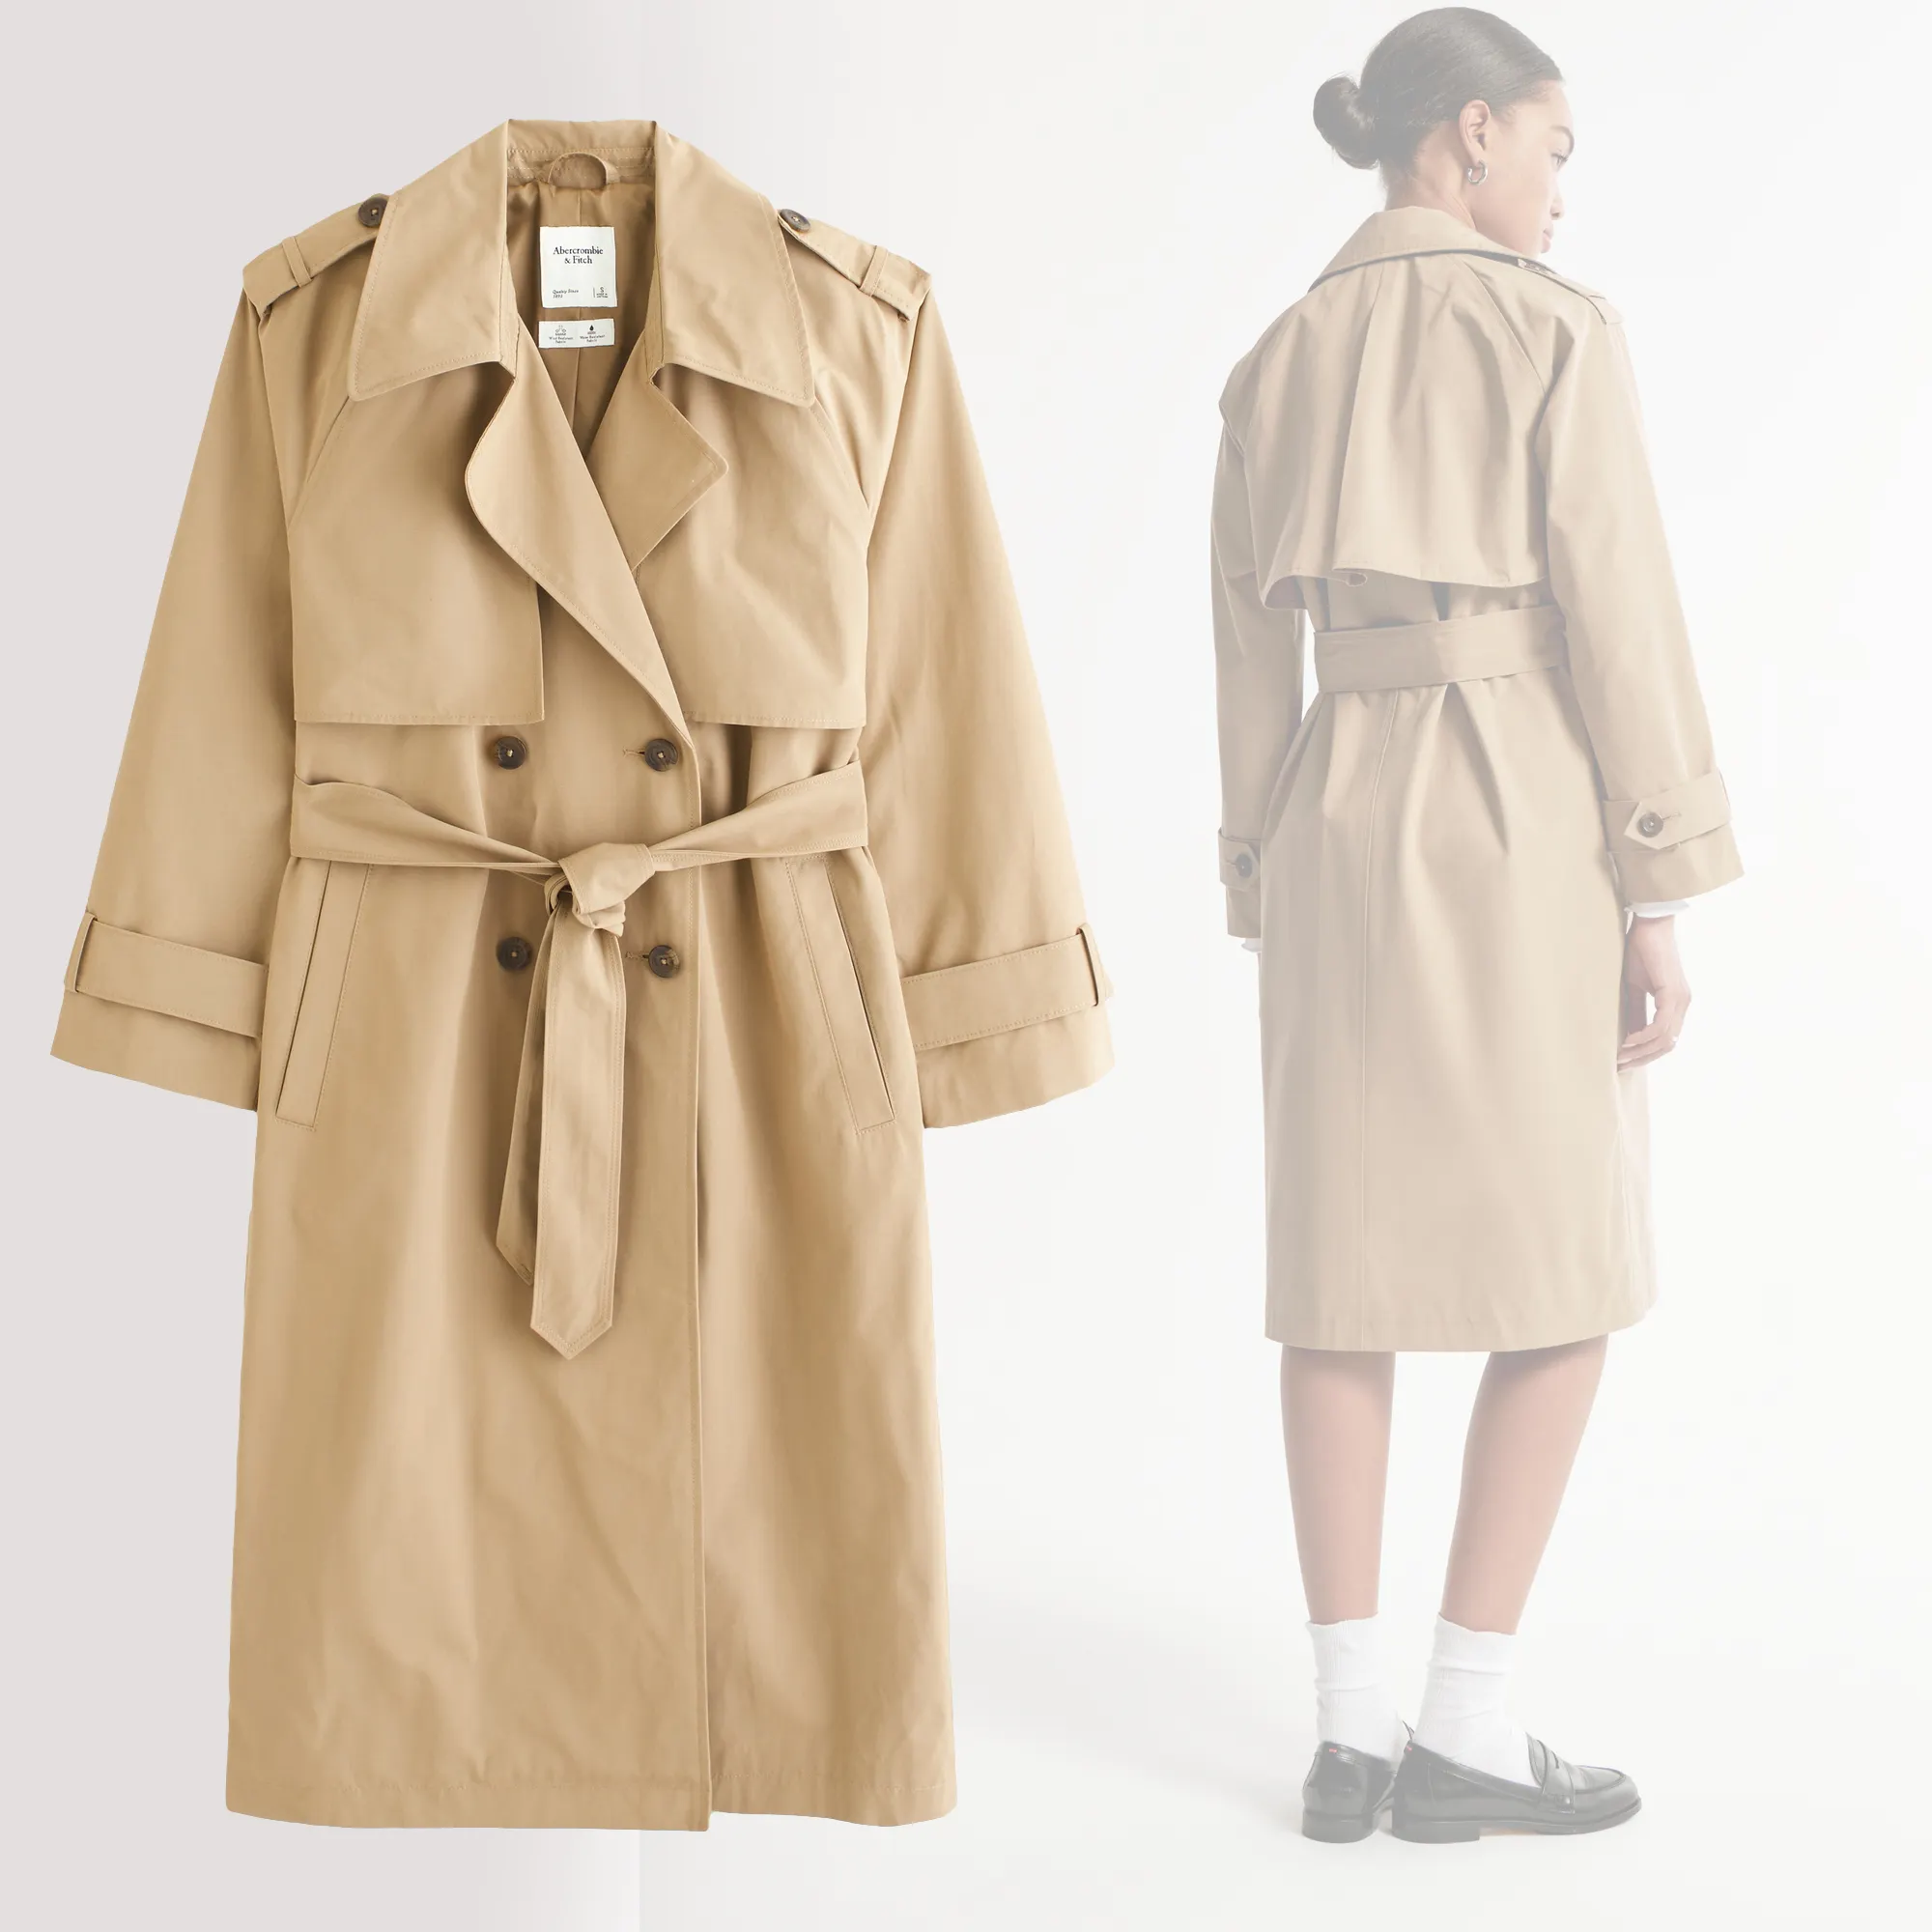 Twill Cotton Elevated Parka Trench Coat Double Breasted Buttons Old Classic Coats For Women Water resistence Oversized